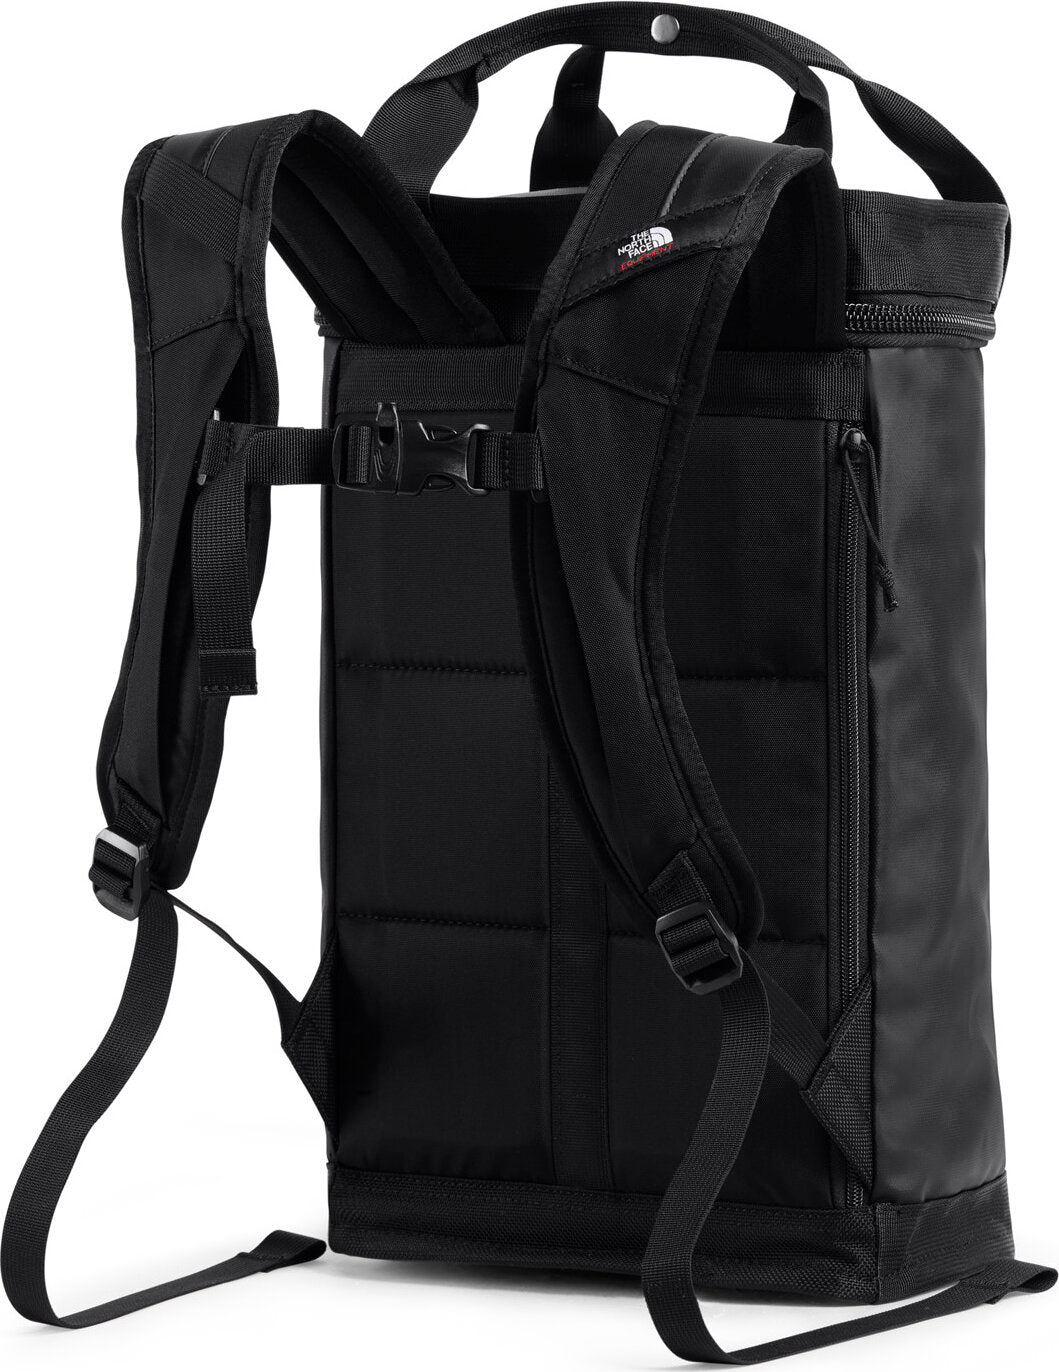 THE NORTH FACE／BOOK PACK ／14L